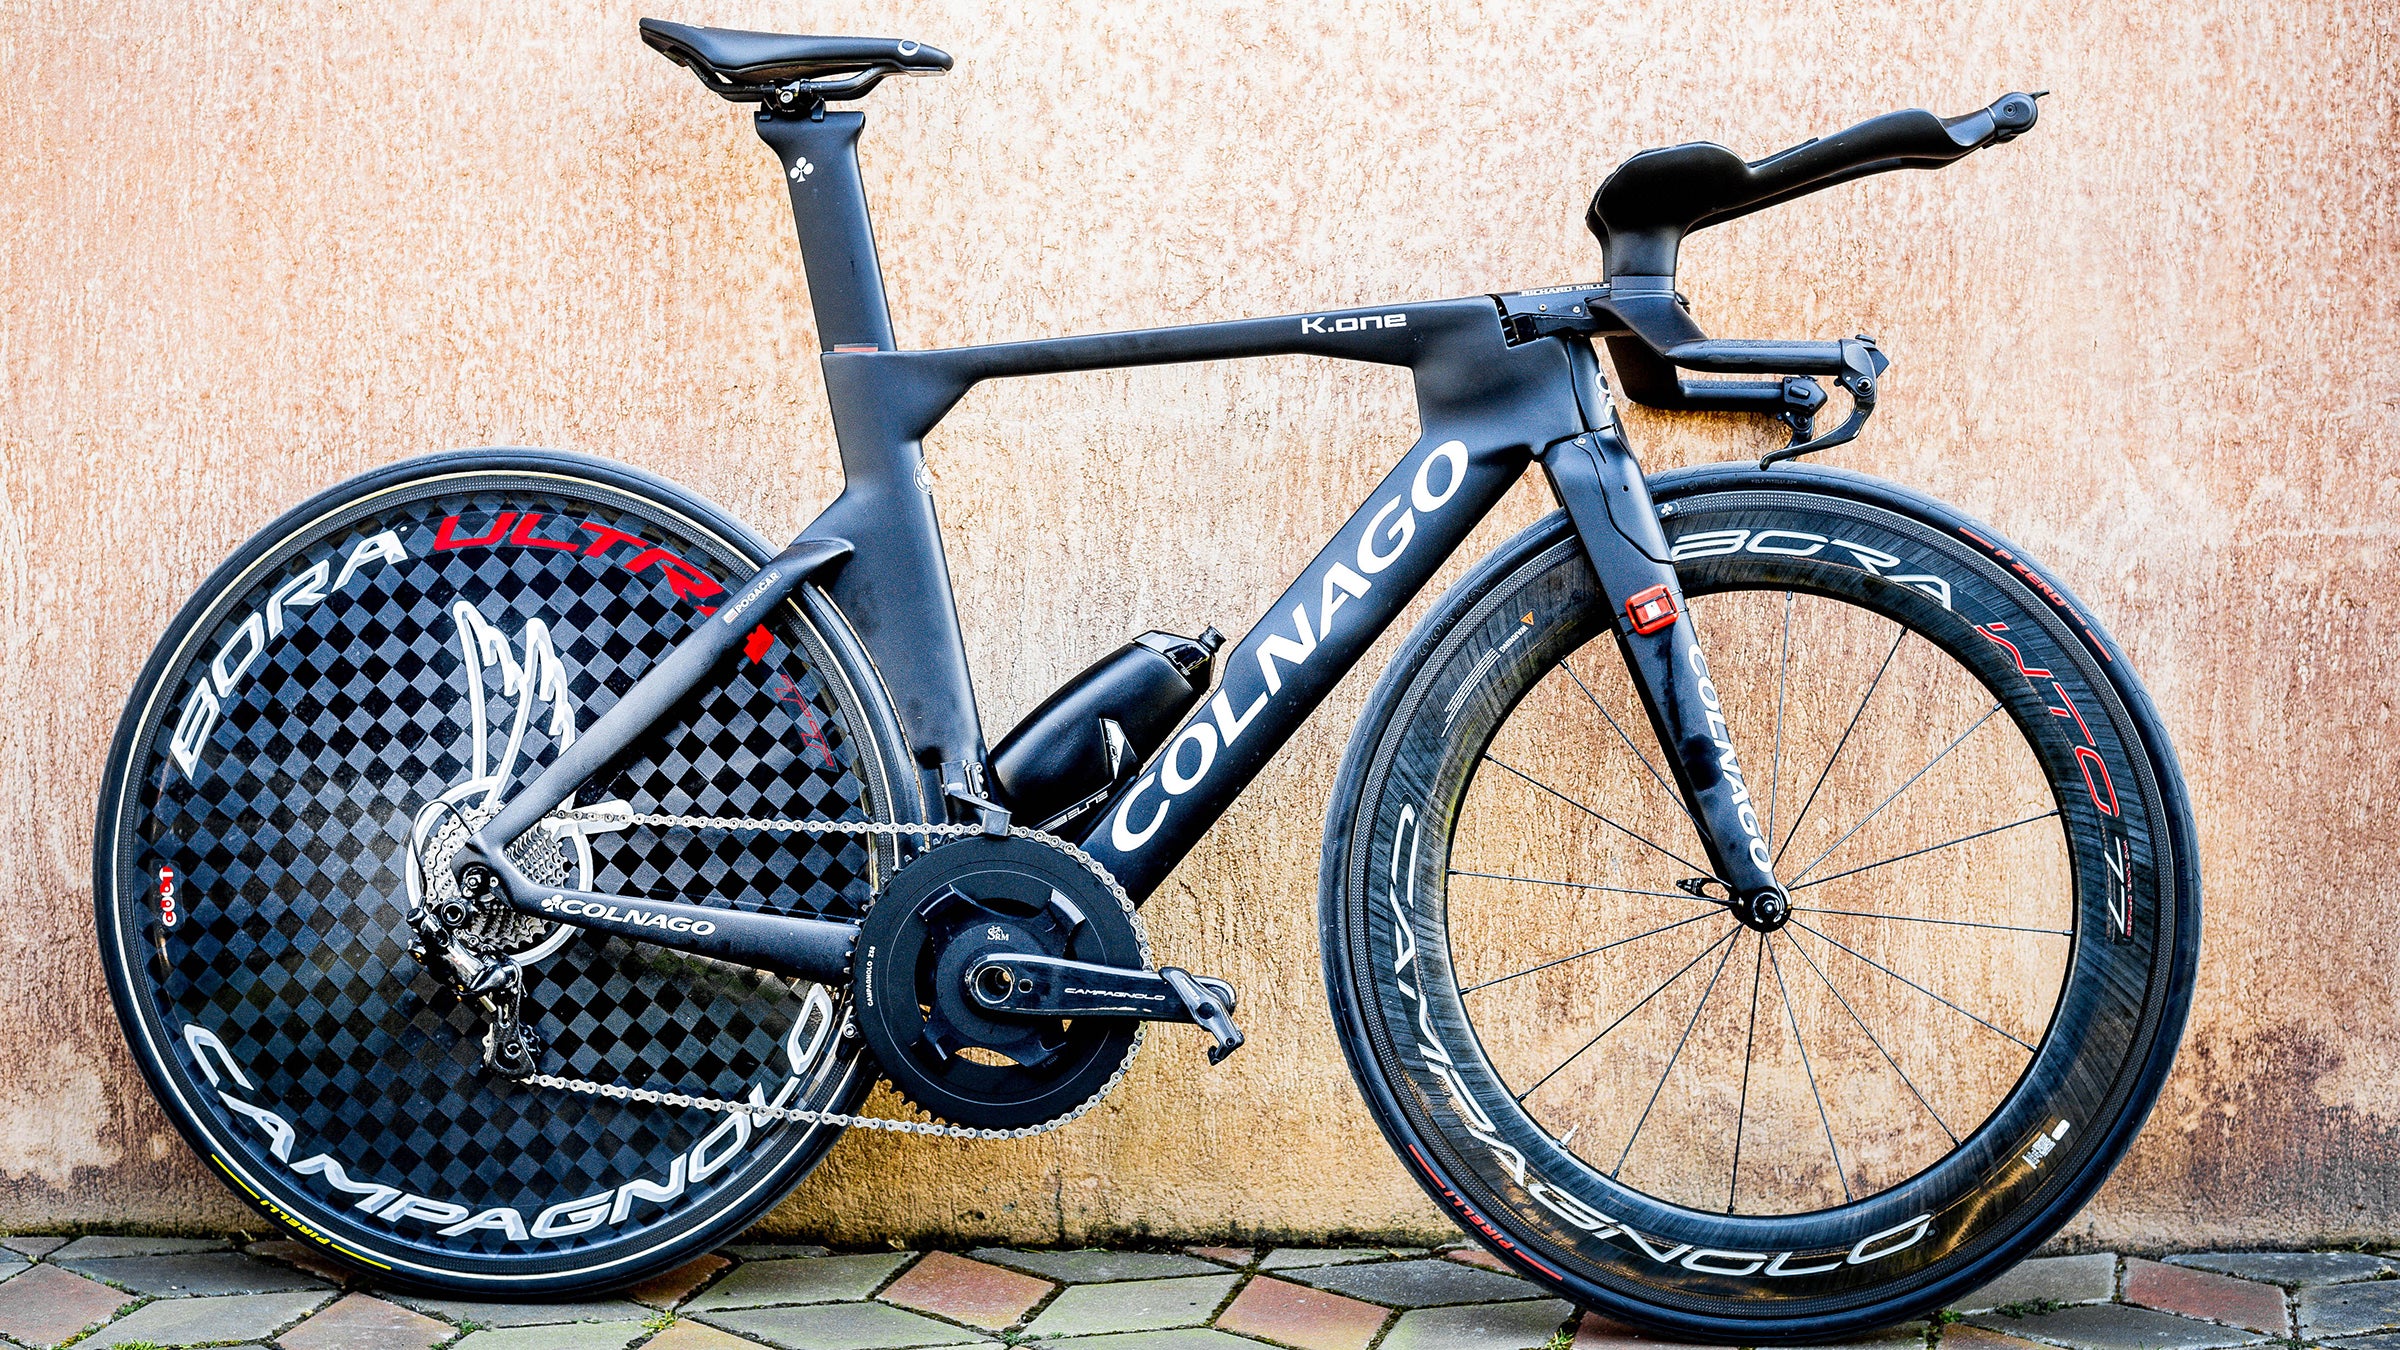 Gallery Tadej Pogačars Colnago K.One TT with just a single, massive ring and chain guard